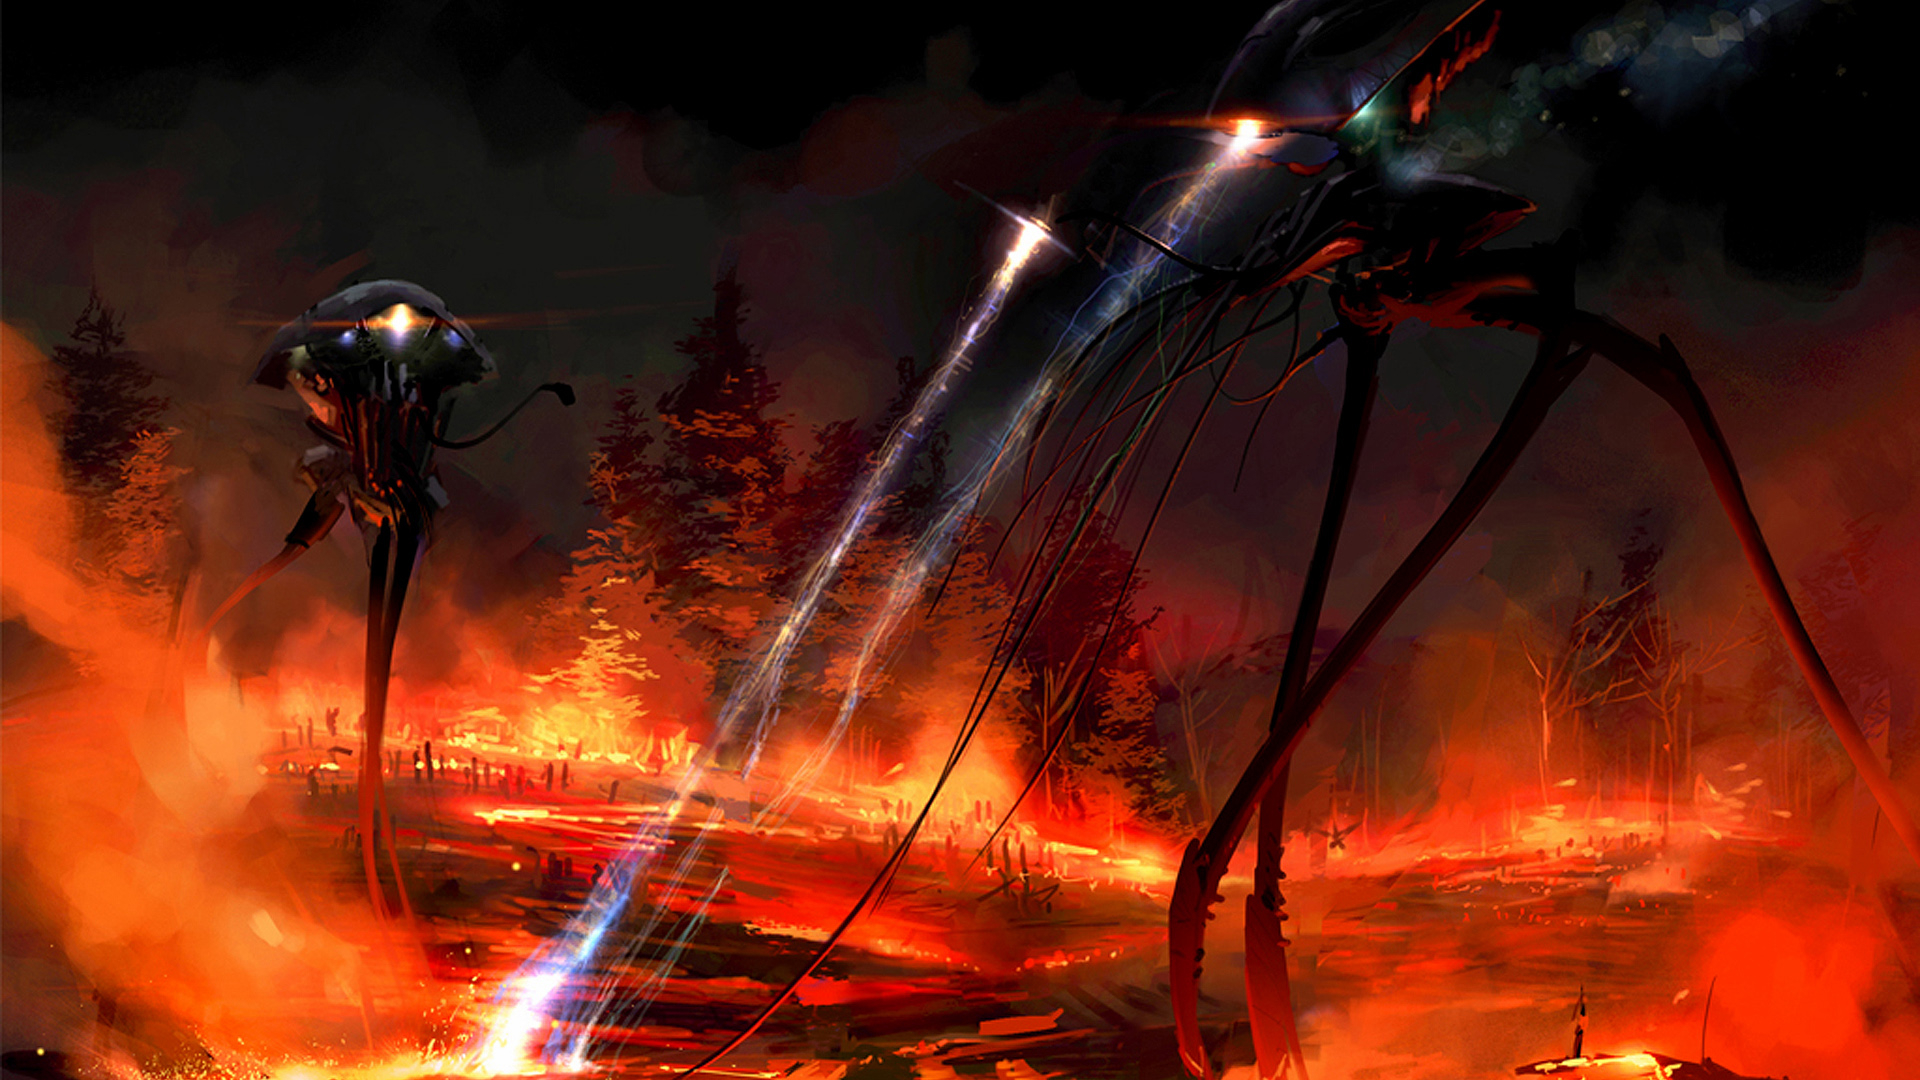 1920x1080 10+ War Of The Worlds HD Wallpapers and Backgrounds